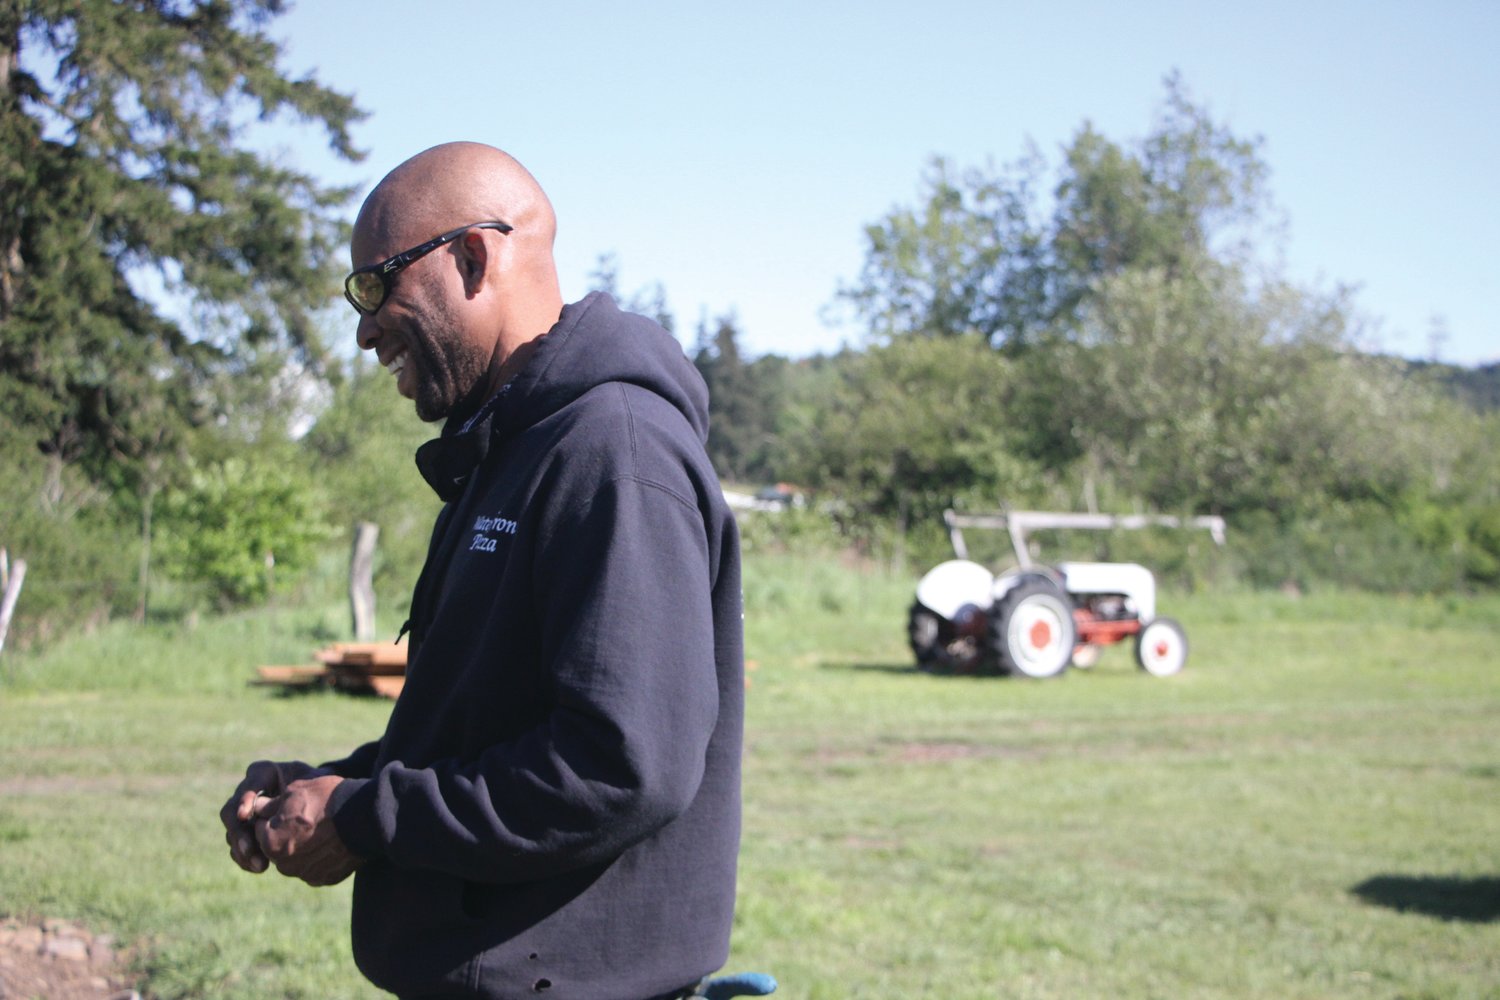 Peter Mustin, one of the county’s only Black farmers and the area’s largest Black landowner, is creating a center for community with Woodbridge Farm.